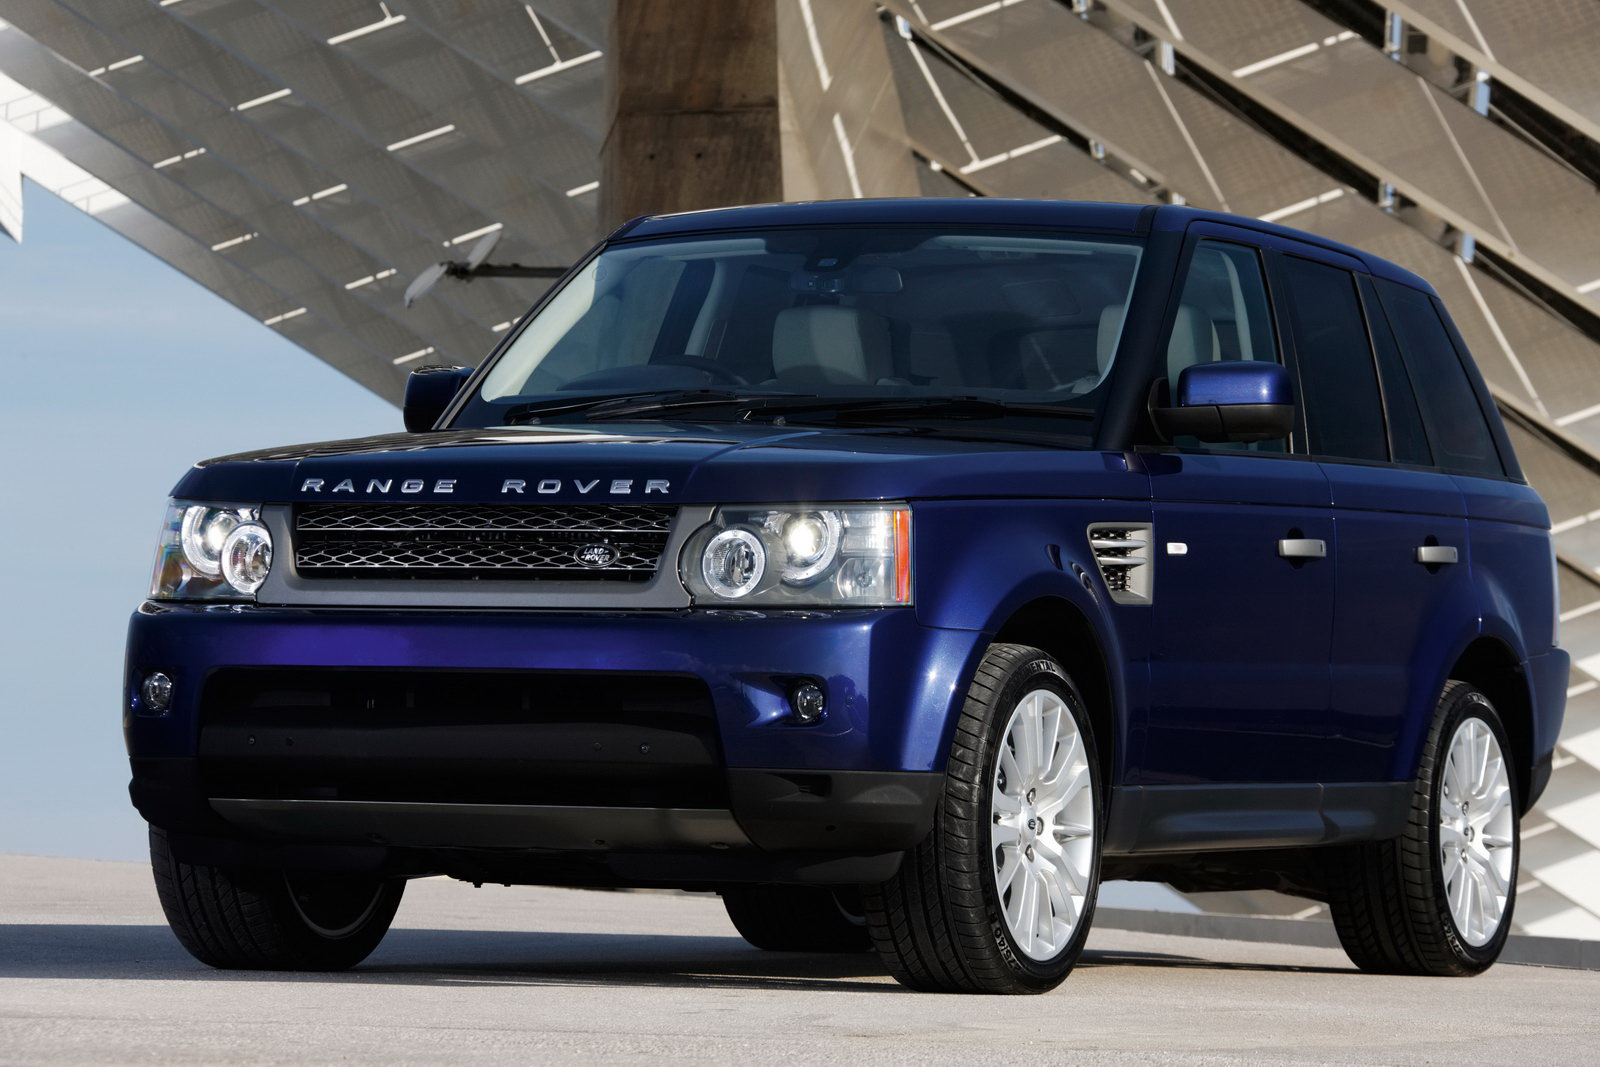 THE CAR: VIDEO: 40 Years of the Range Rover in 1:40 Minutes